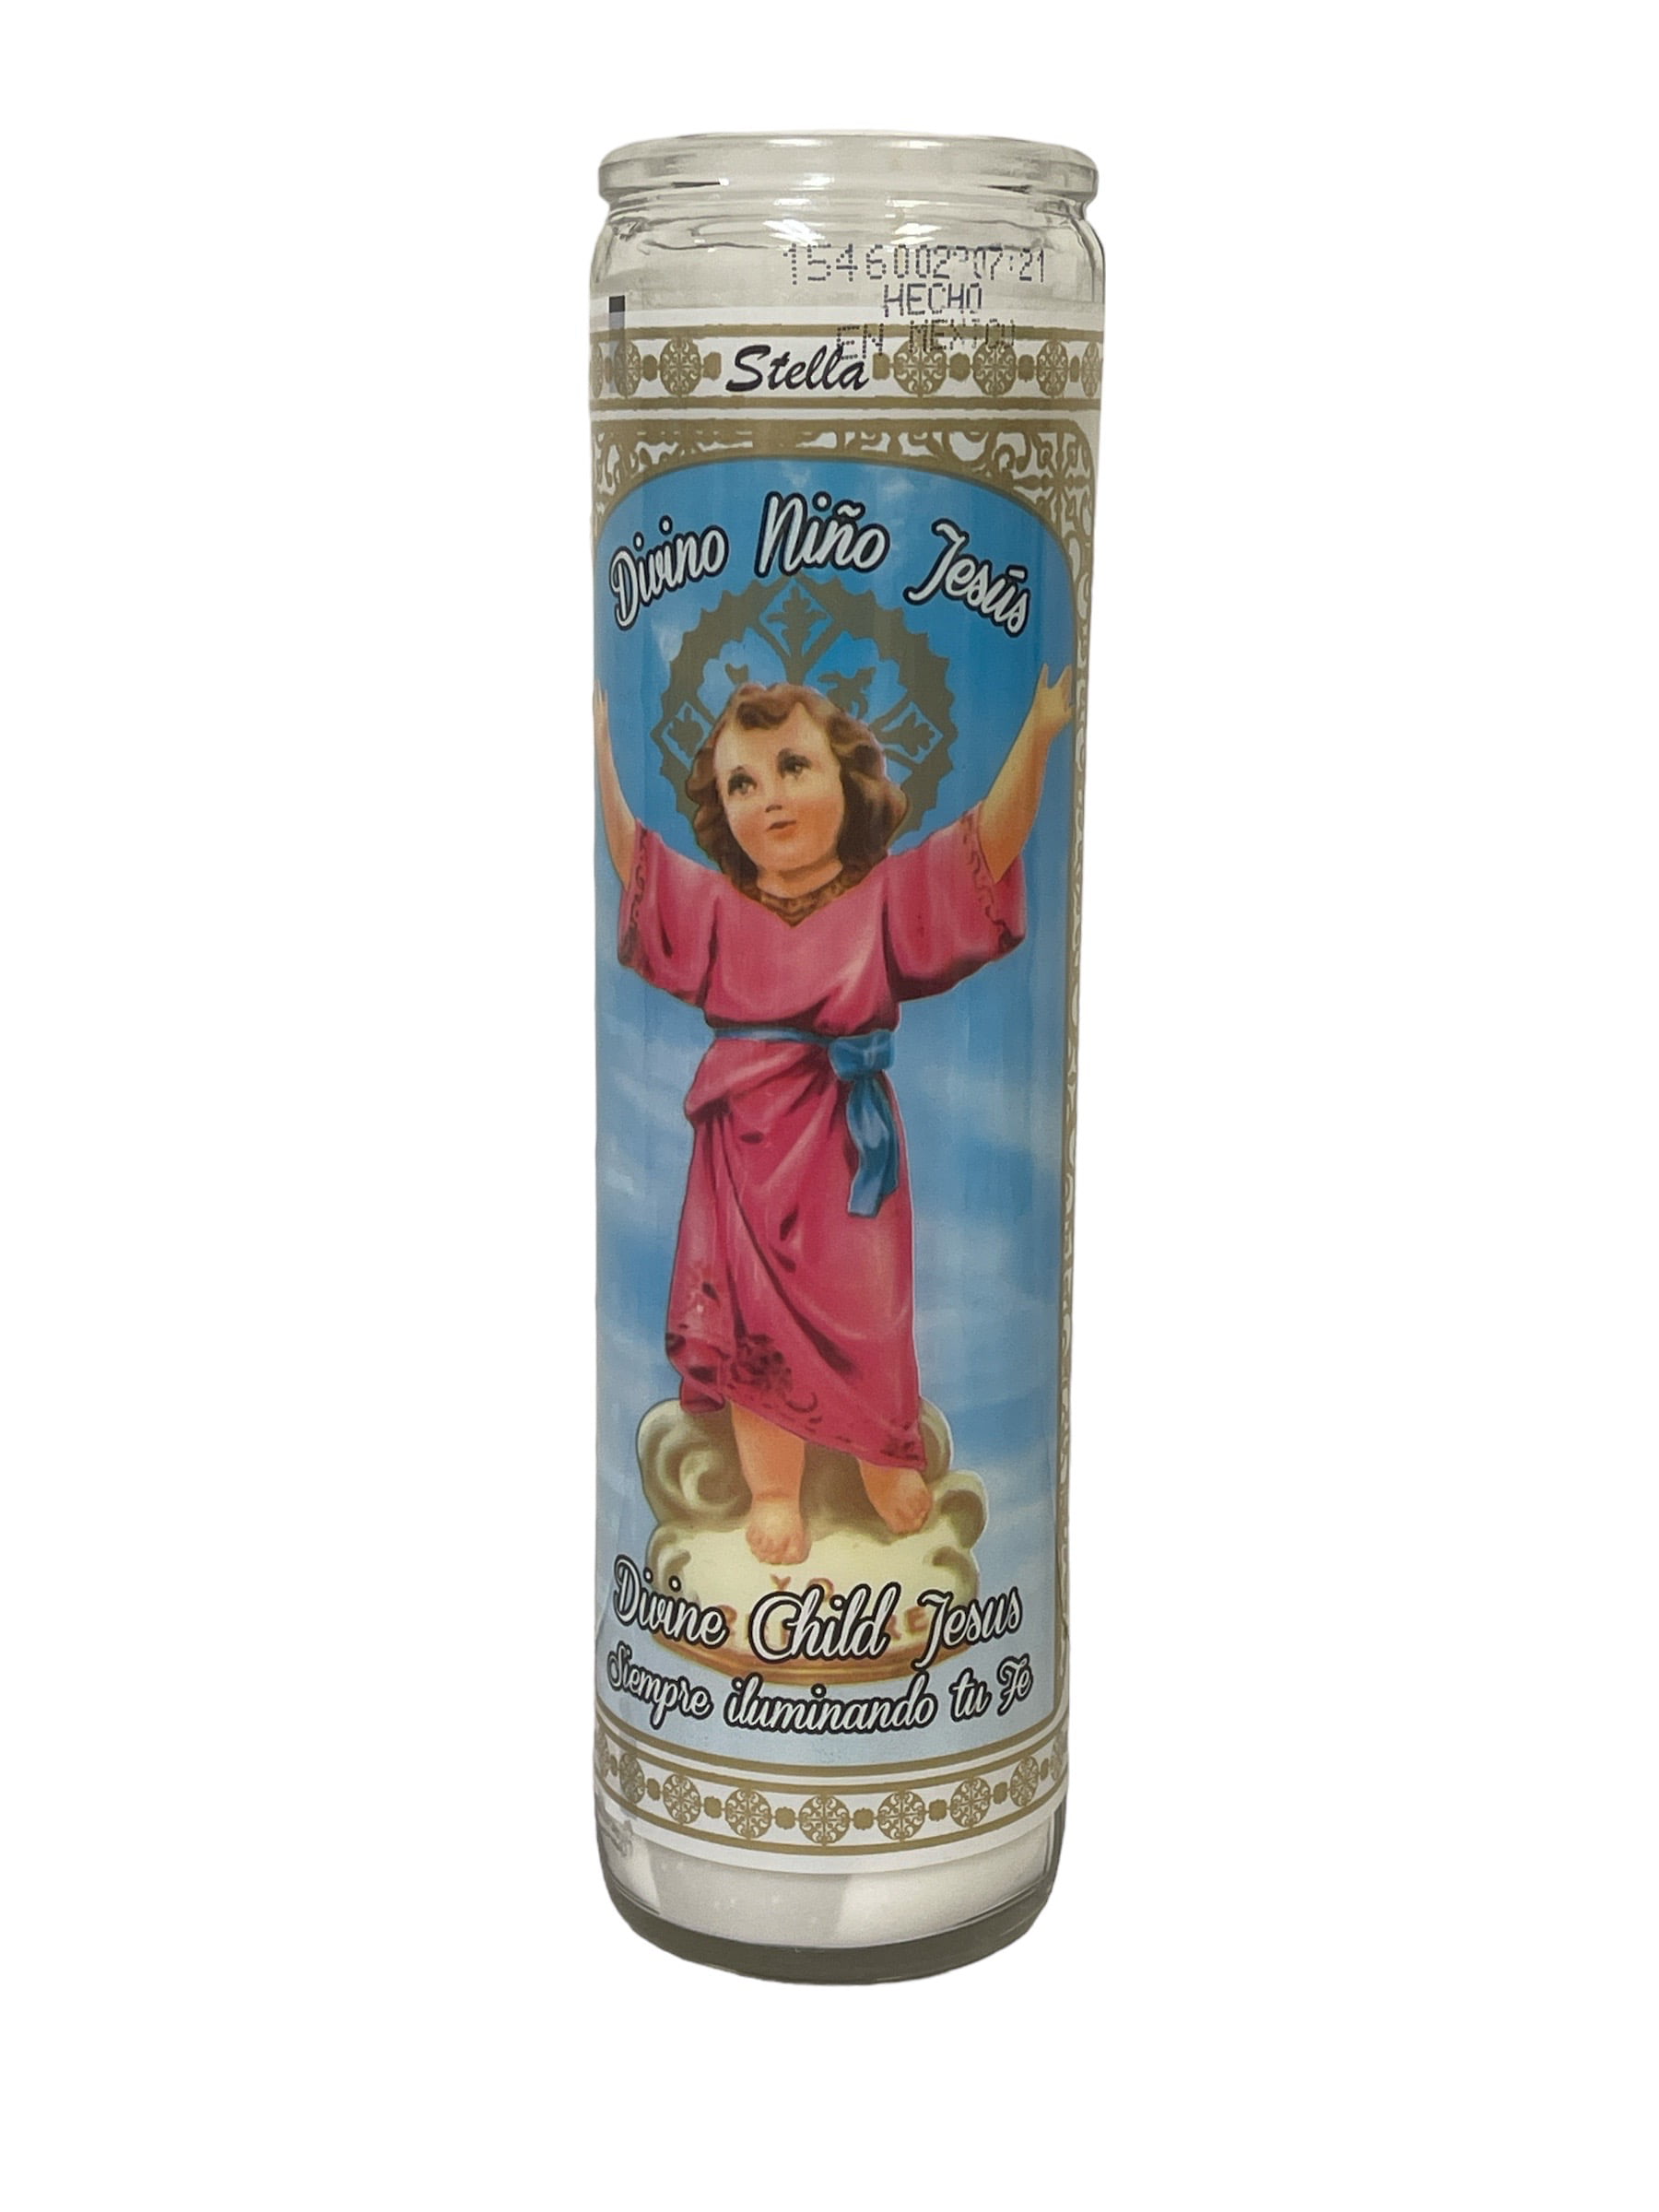 Magiclight Religious Candles 44 oz - Clear Glass Jar, Unscented White Wax, Size: 44oz